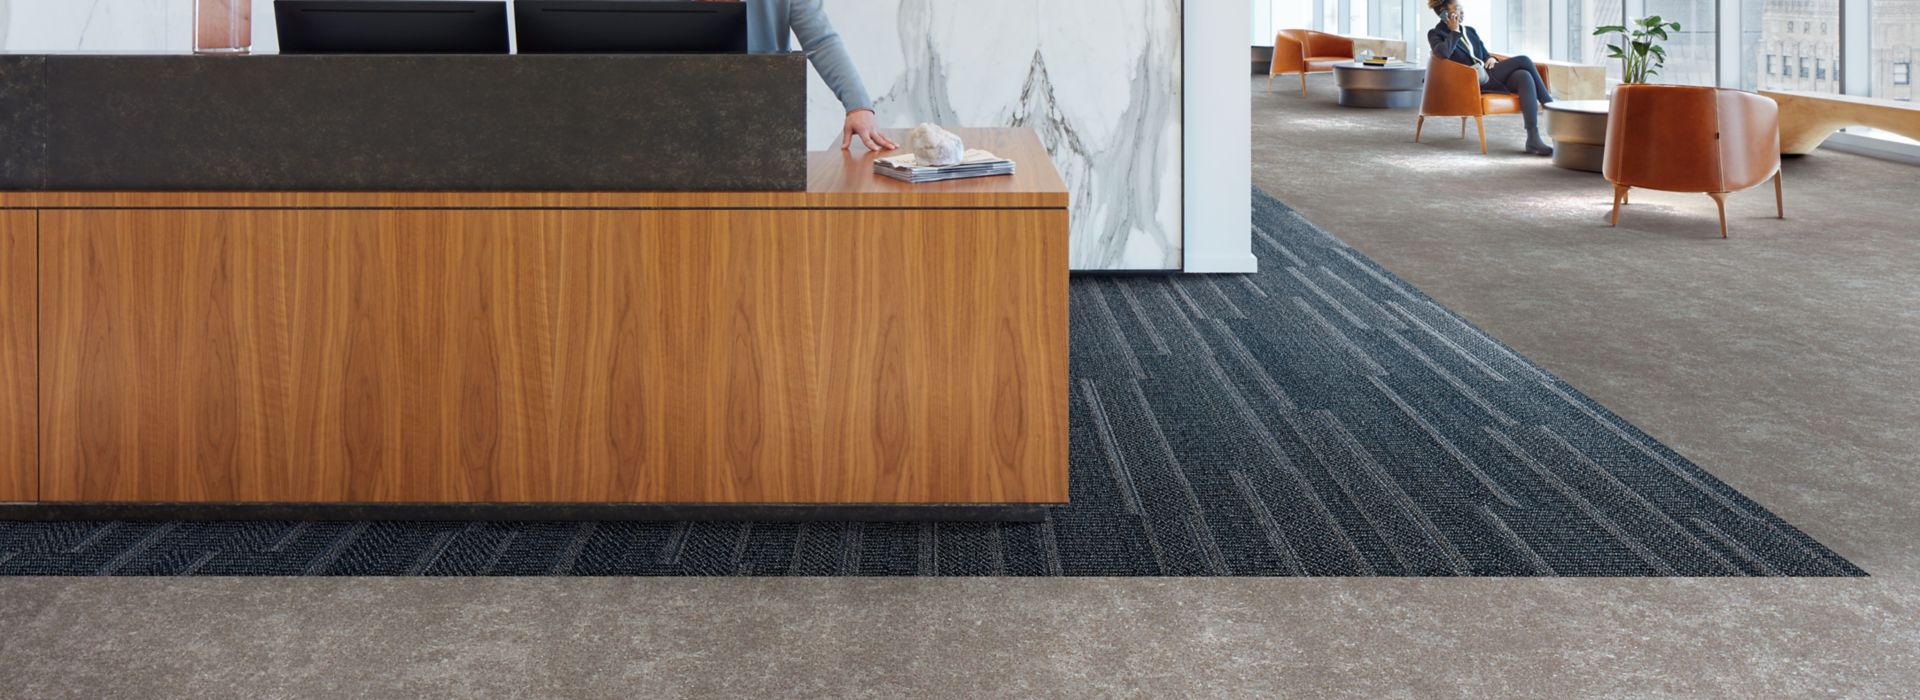 Interface Simple Sash plank carpet tile and Walk of Life LVT in a corporate lobby area with front desk  afbeeldingnummer 1